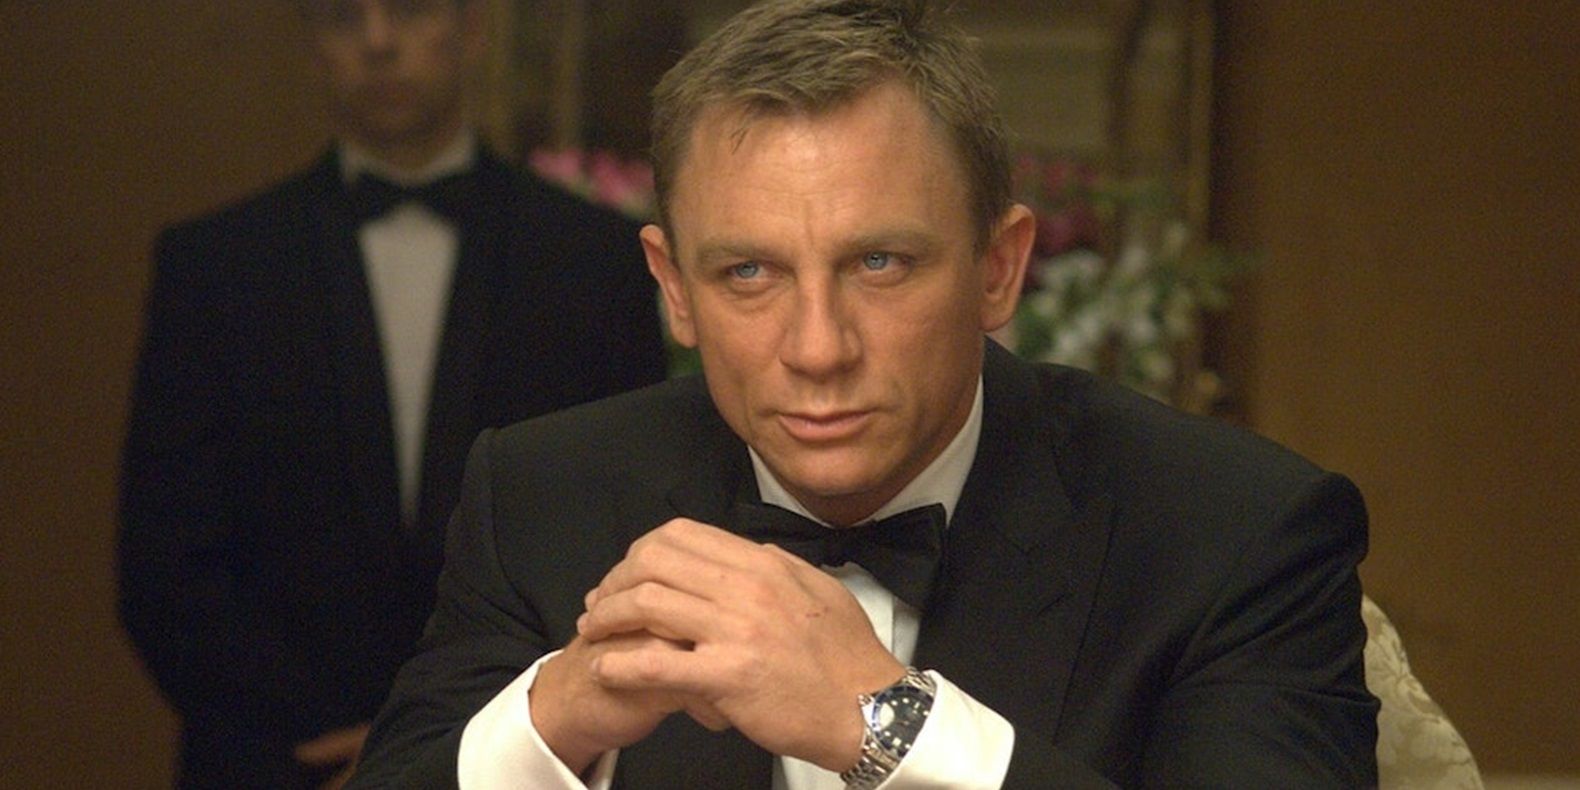 James Bond at a poker table in Casino Royale